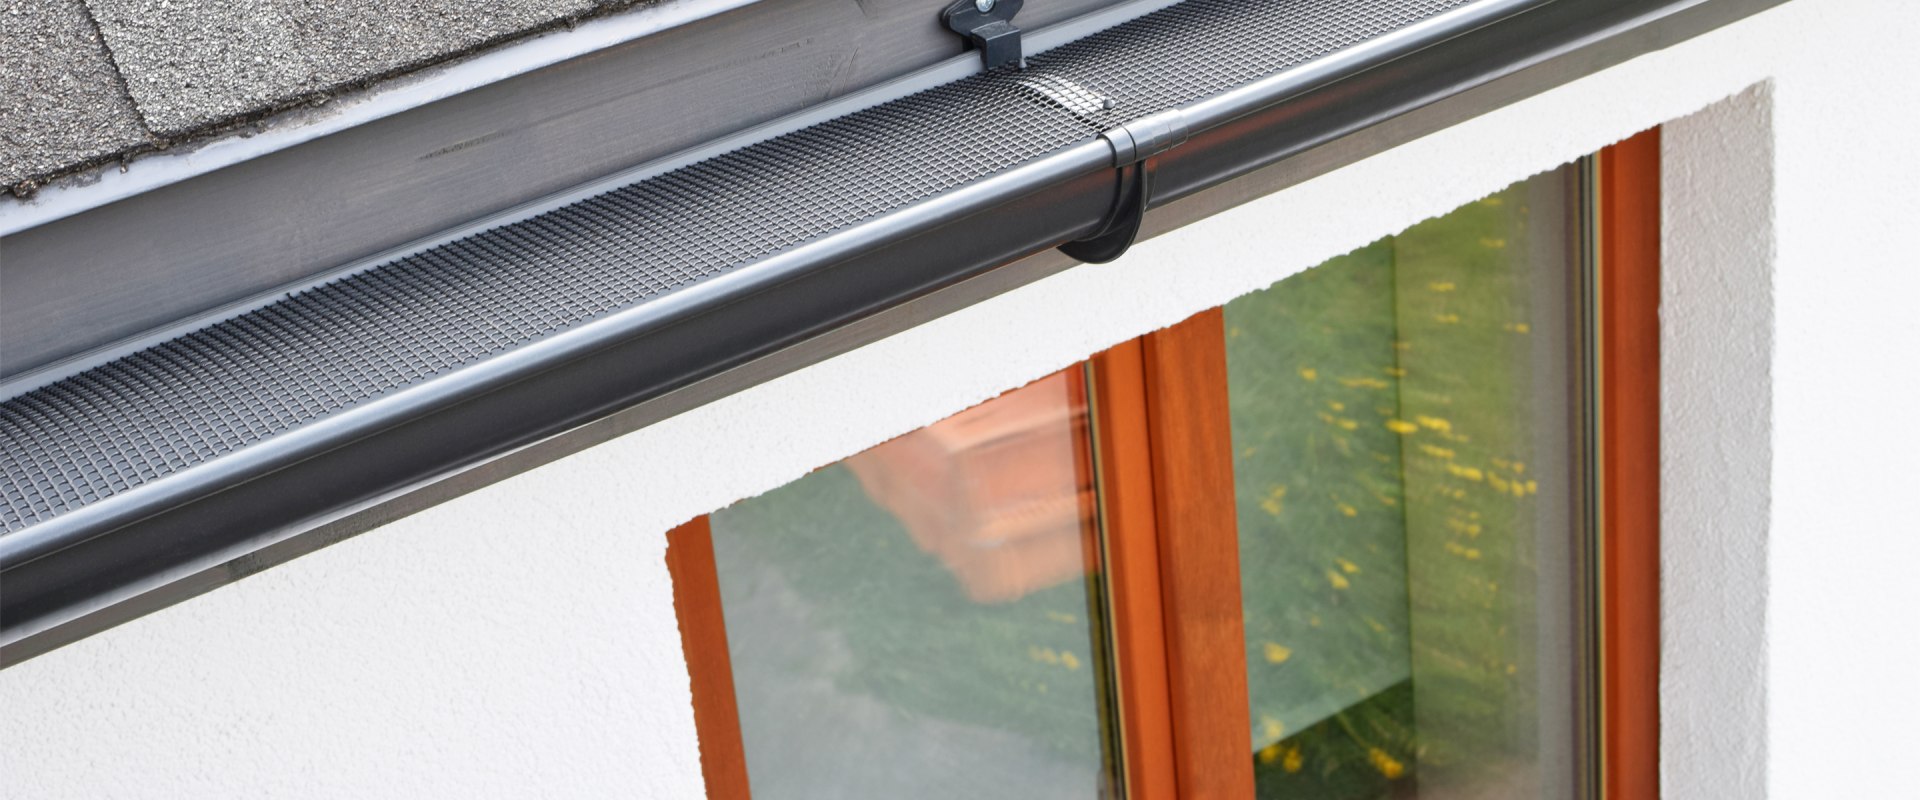 What is the best gutter to put on your house?